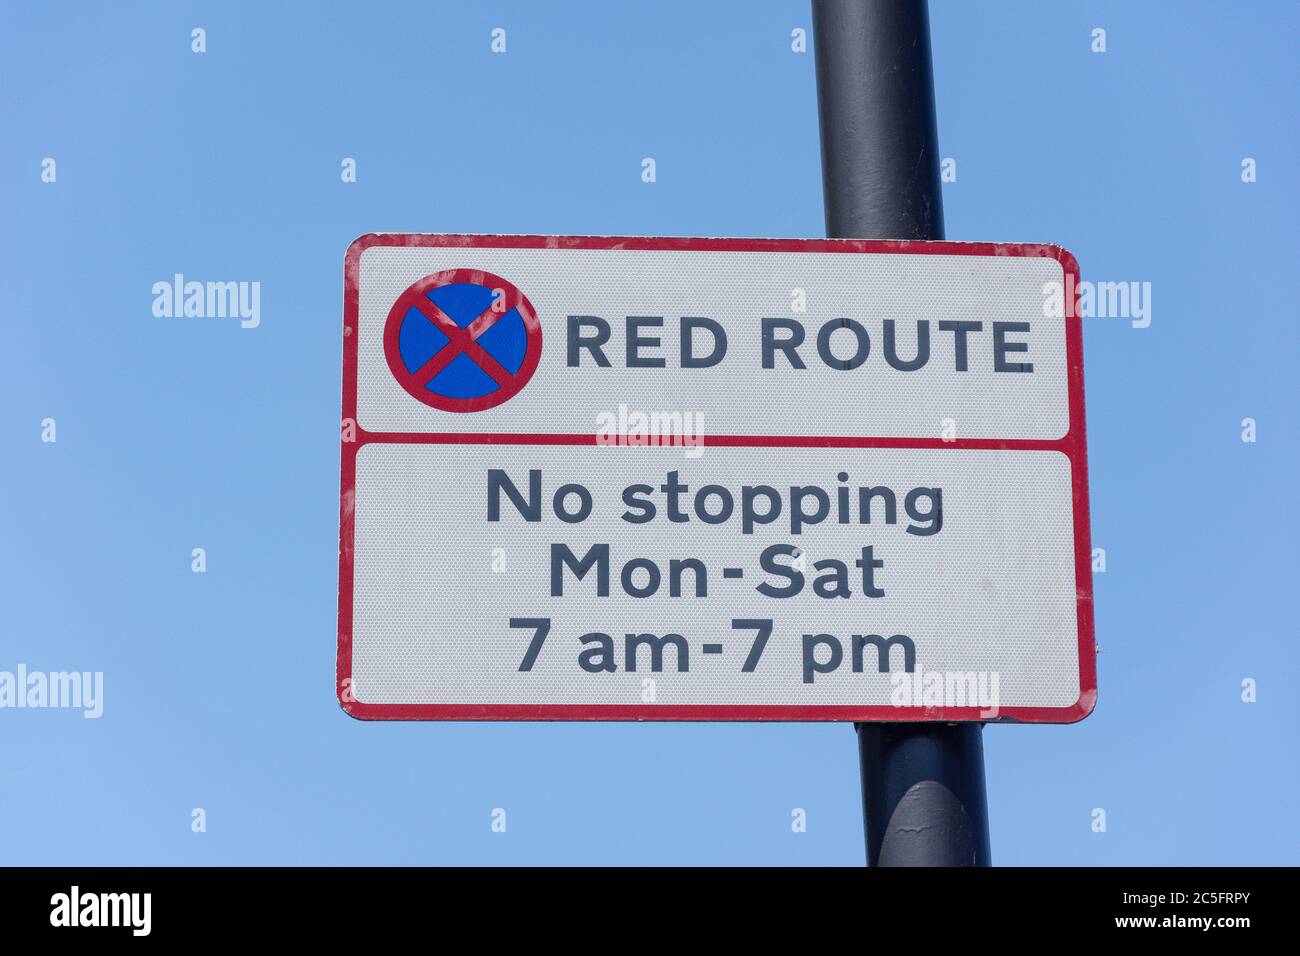 Red Route No stopping sign, Roehampton Lane, Roehampton, London Borough of Wandsworth, Greater London, England, United Kingdom Stock Photo